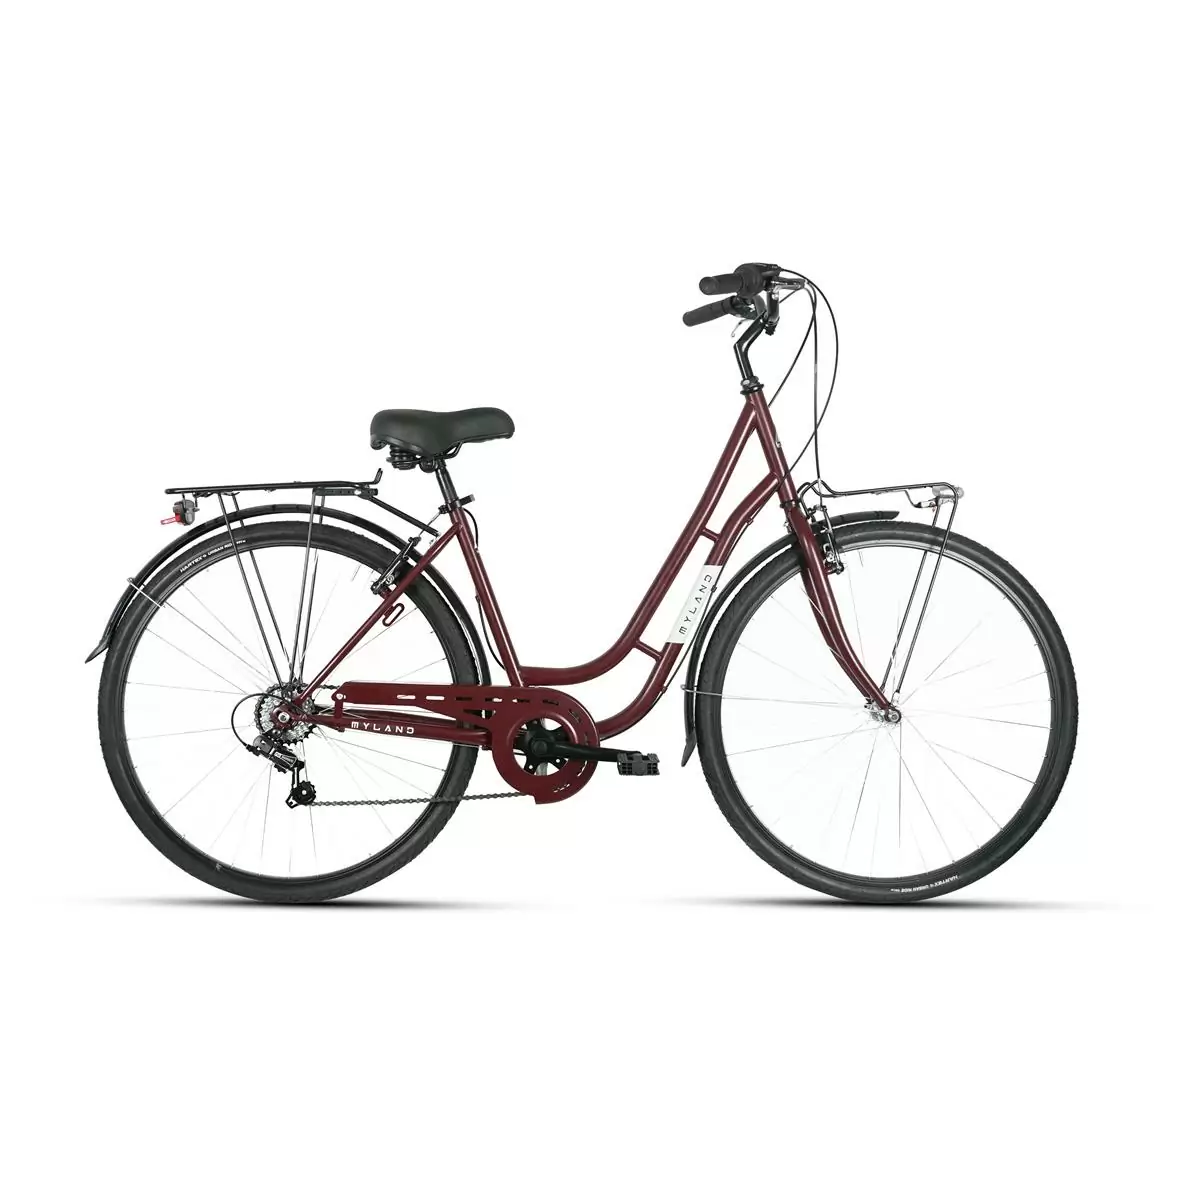 DOSSO 28.3 City Bike 28'' 7s Woman Red Size M - image